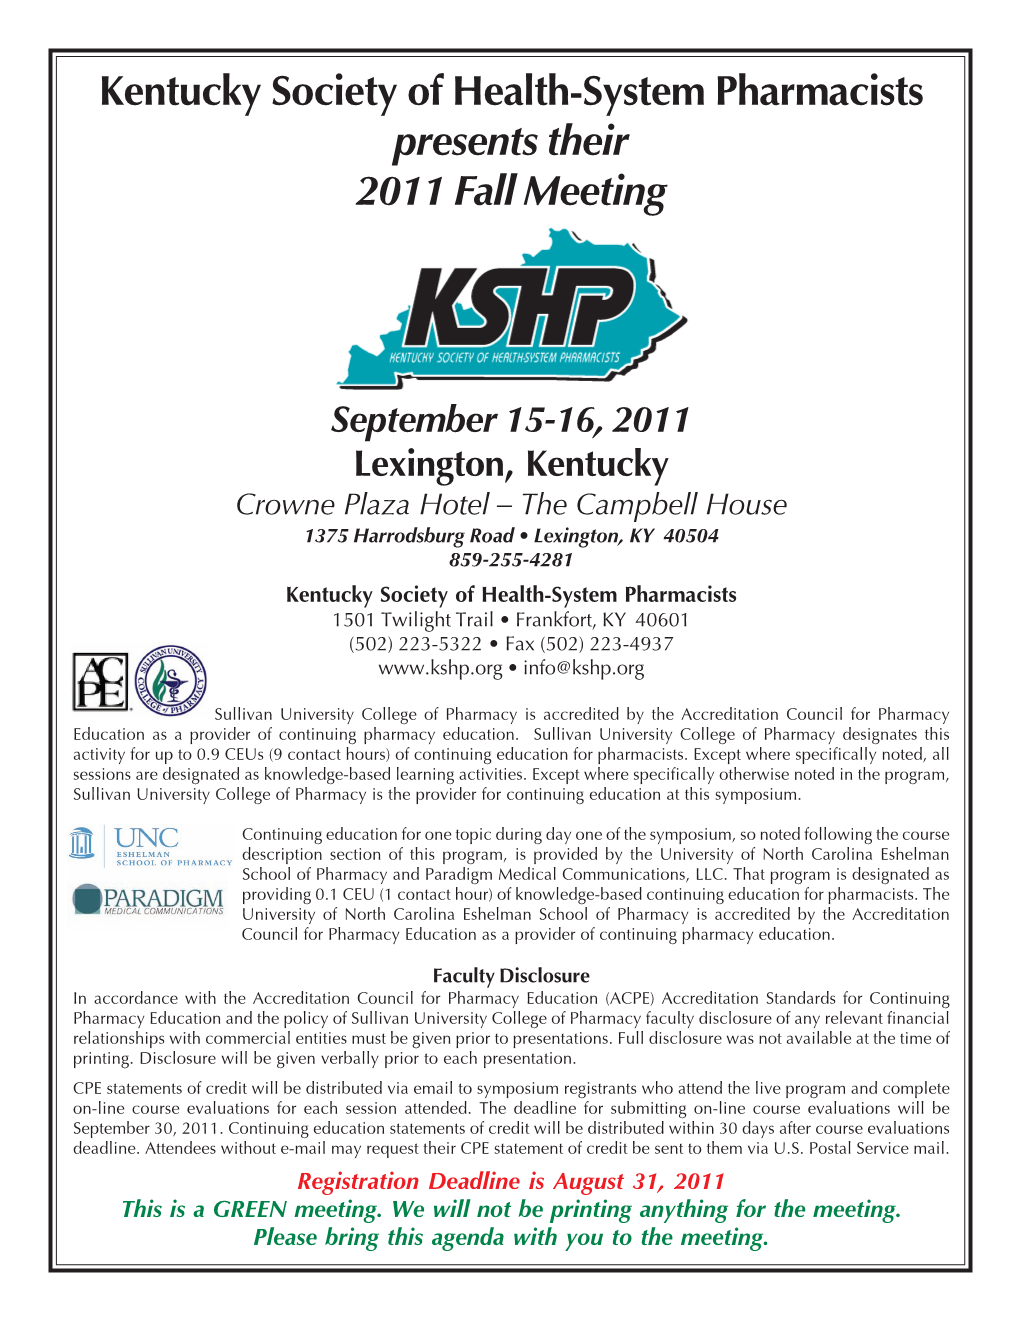 Kentucky Society of Health-System Pharmacists Presents Their 2011 Fall Meeting